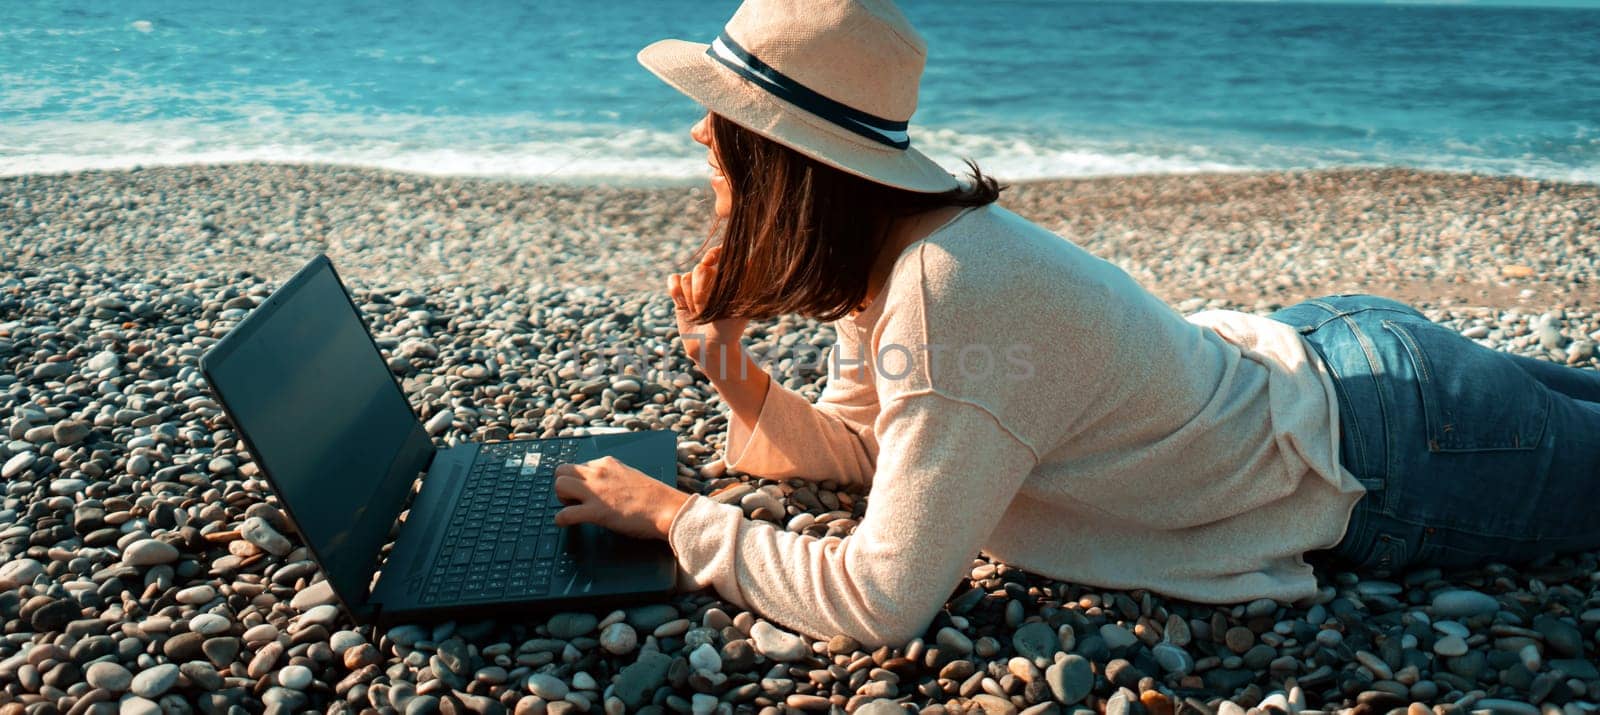 Girl in a hat works on a laptop on the beach, seashore. by africapink